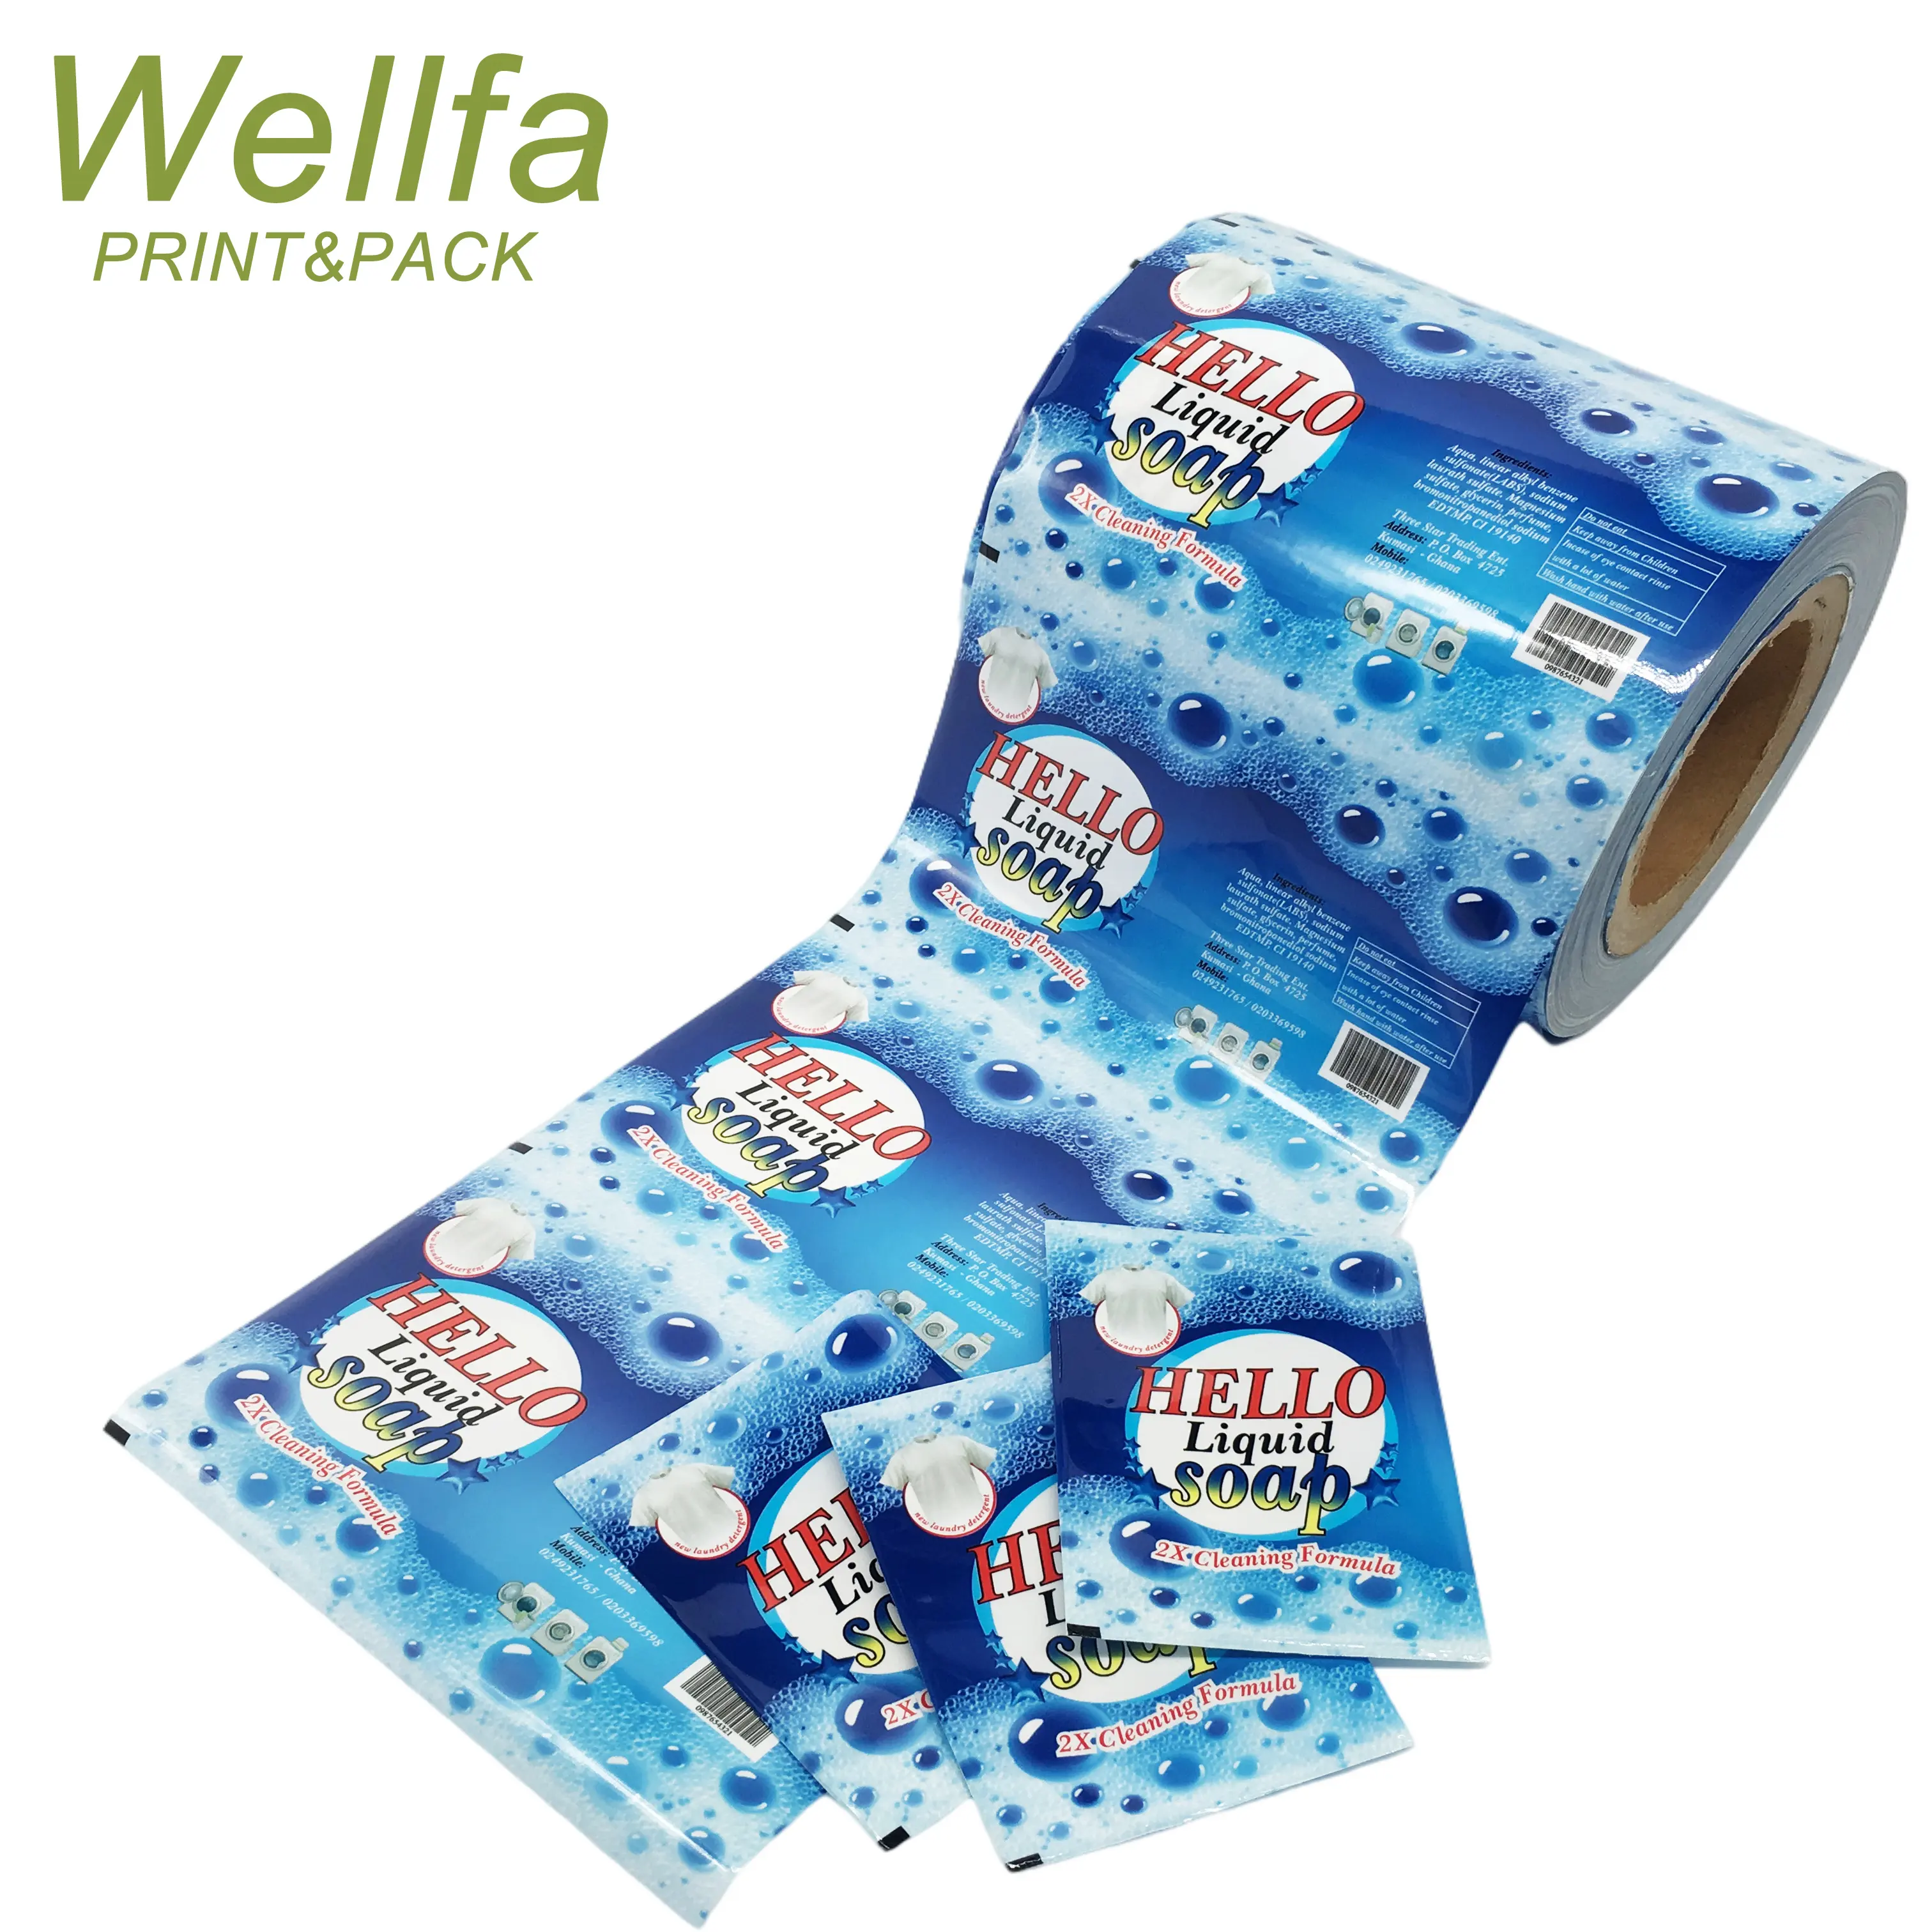 Factory Customized Printed Resistant Heat Sealable Packaging Roll Film for Wrapping Laundry Detergent / liquid detergent pouch